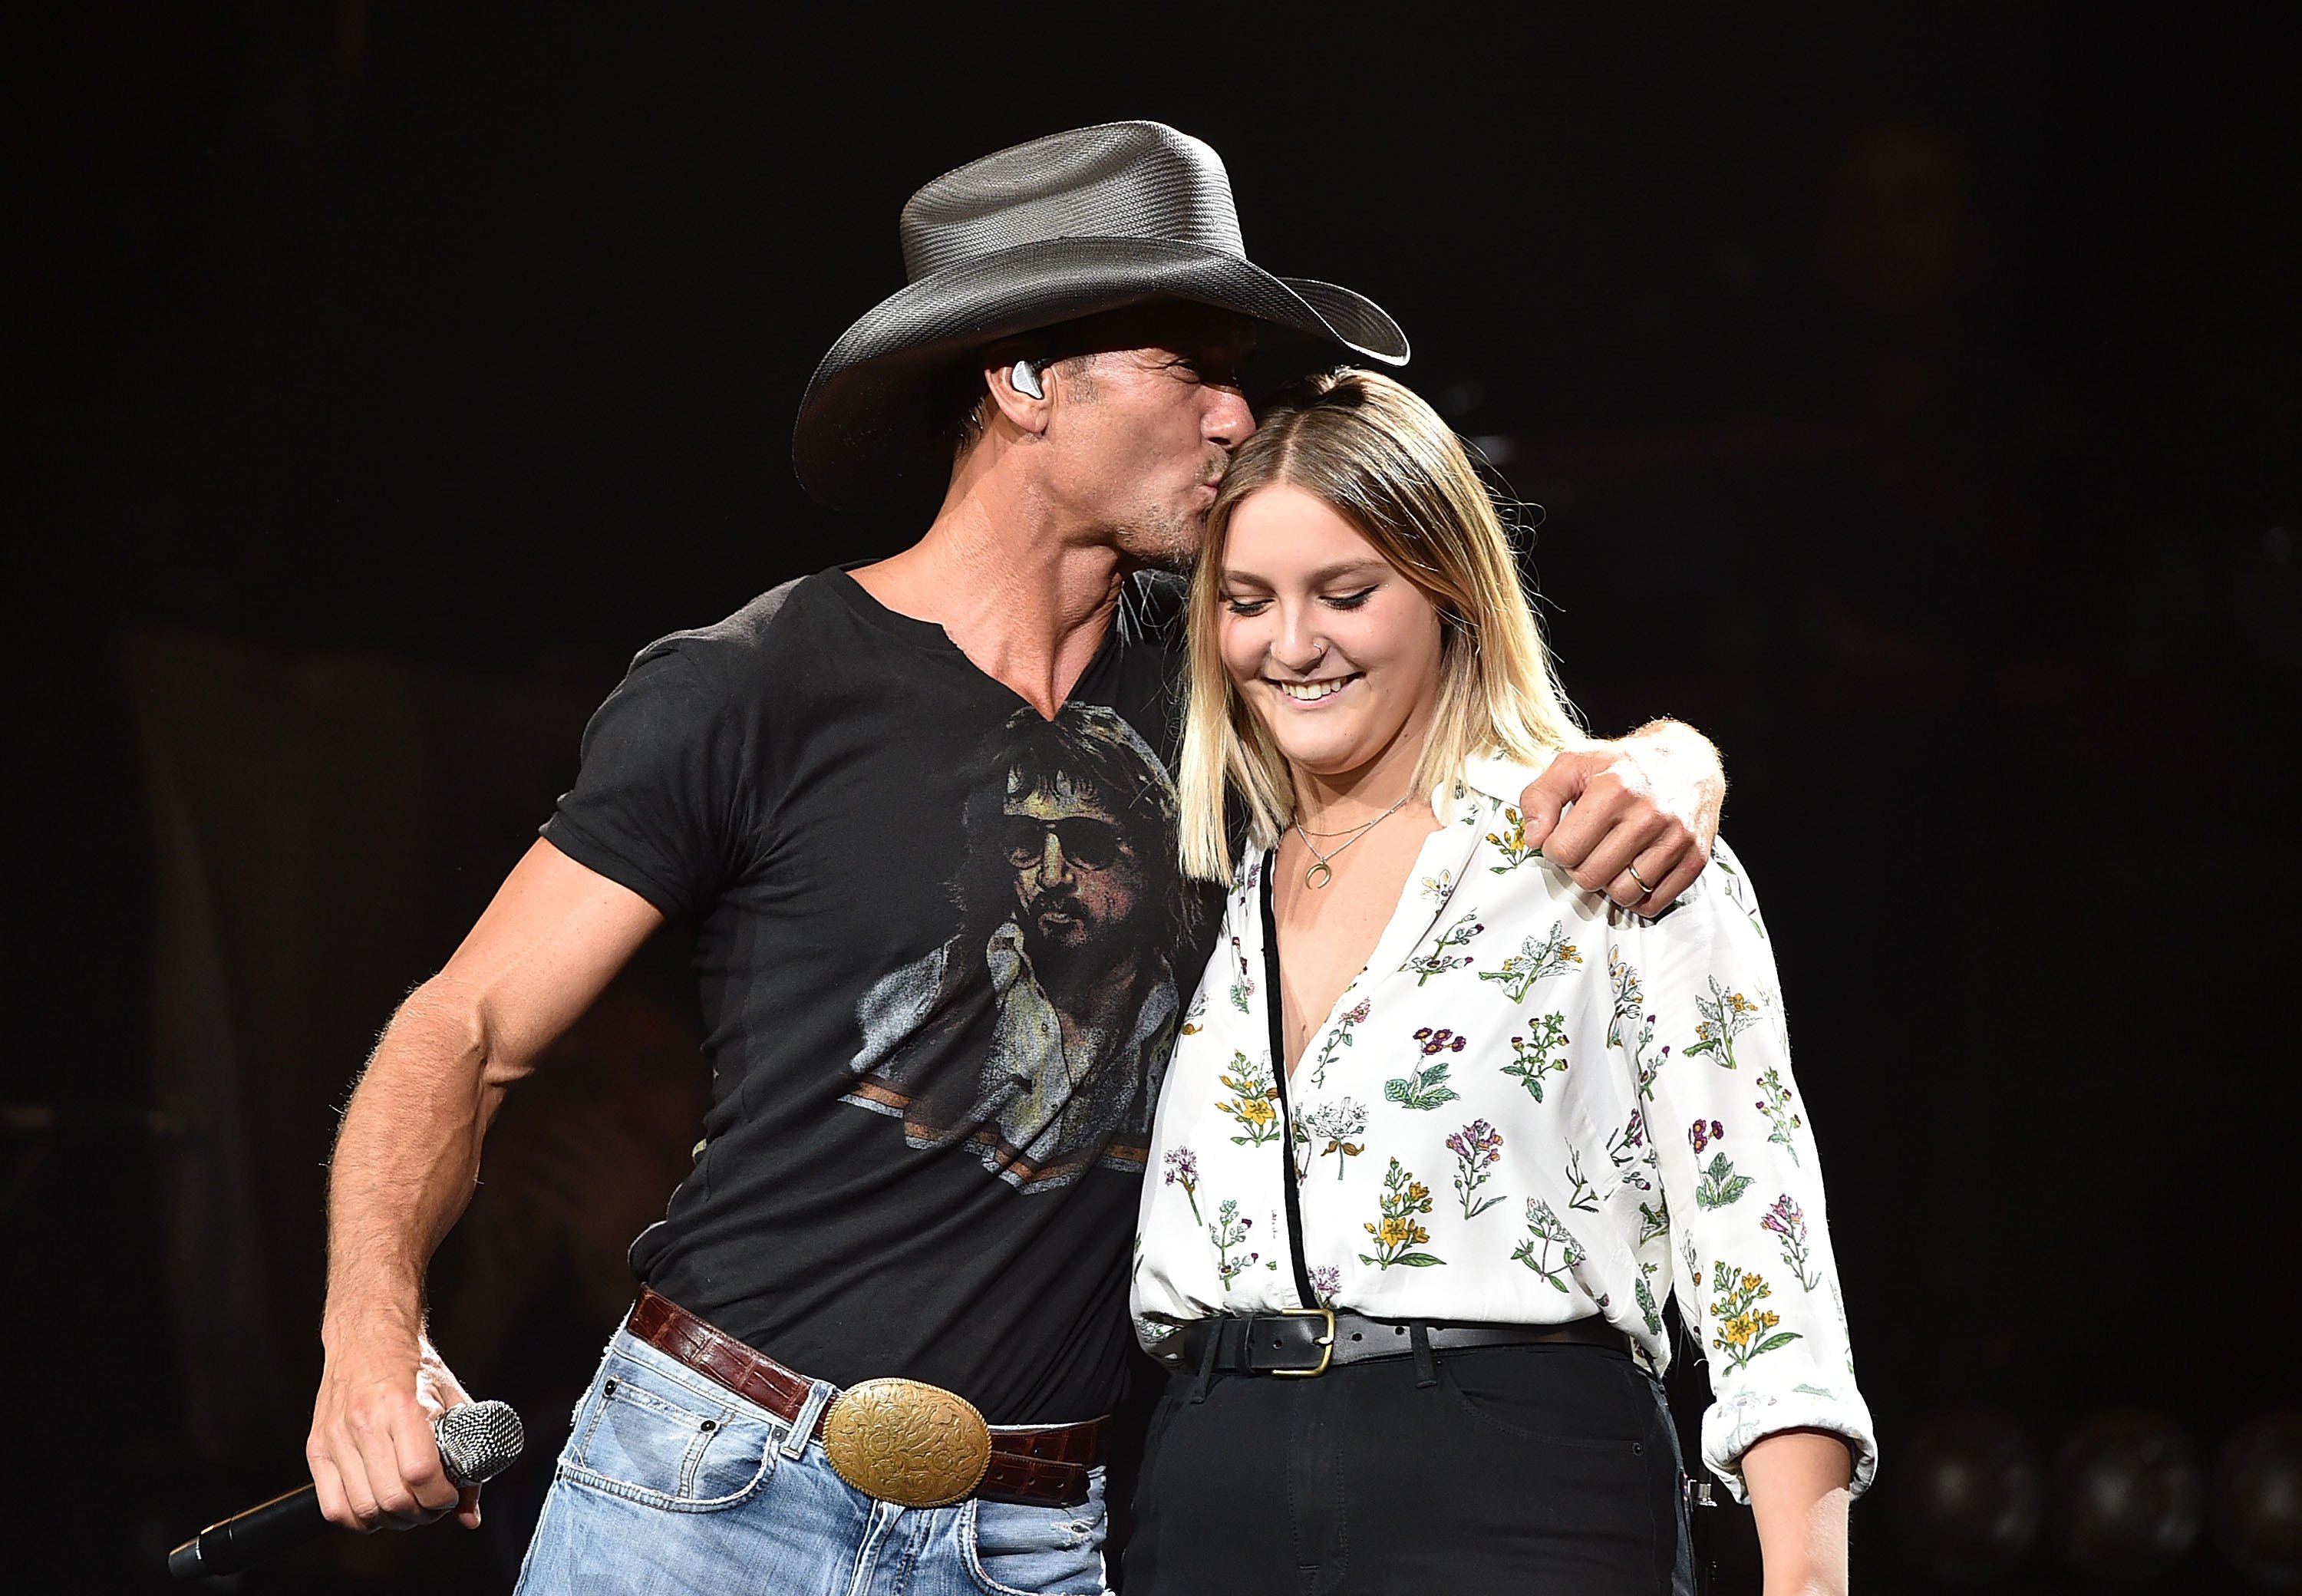 Tim McGraw performs with his daughter Gracie McGraw on the "Shotgun Rider" tour at Bridgestone Arena, on August 15, 2015, in Nashville, Tennessee. | Source: Getty Images 